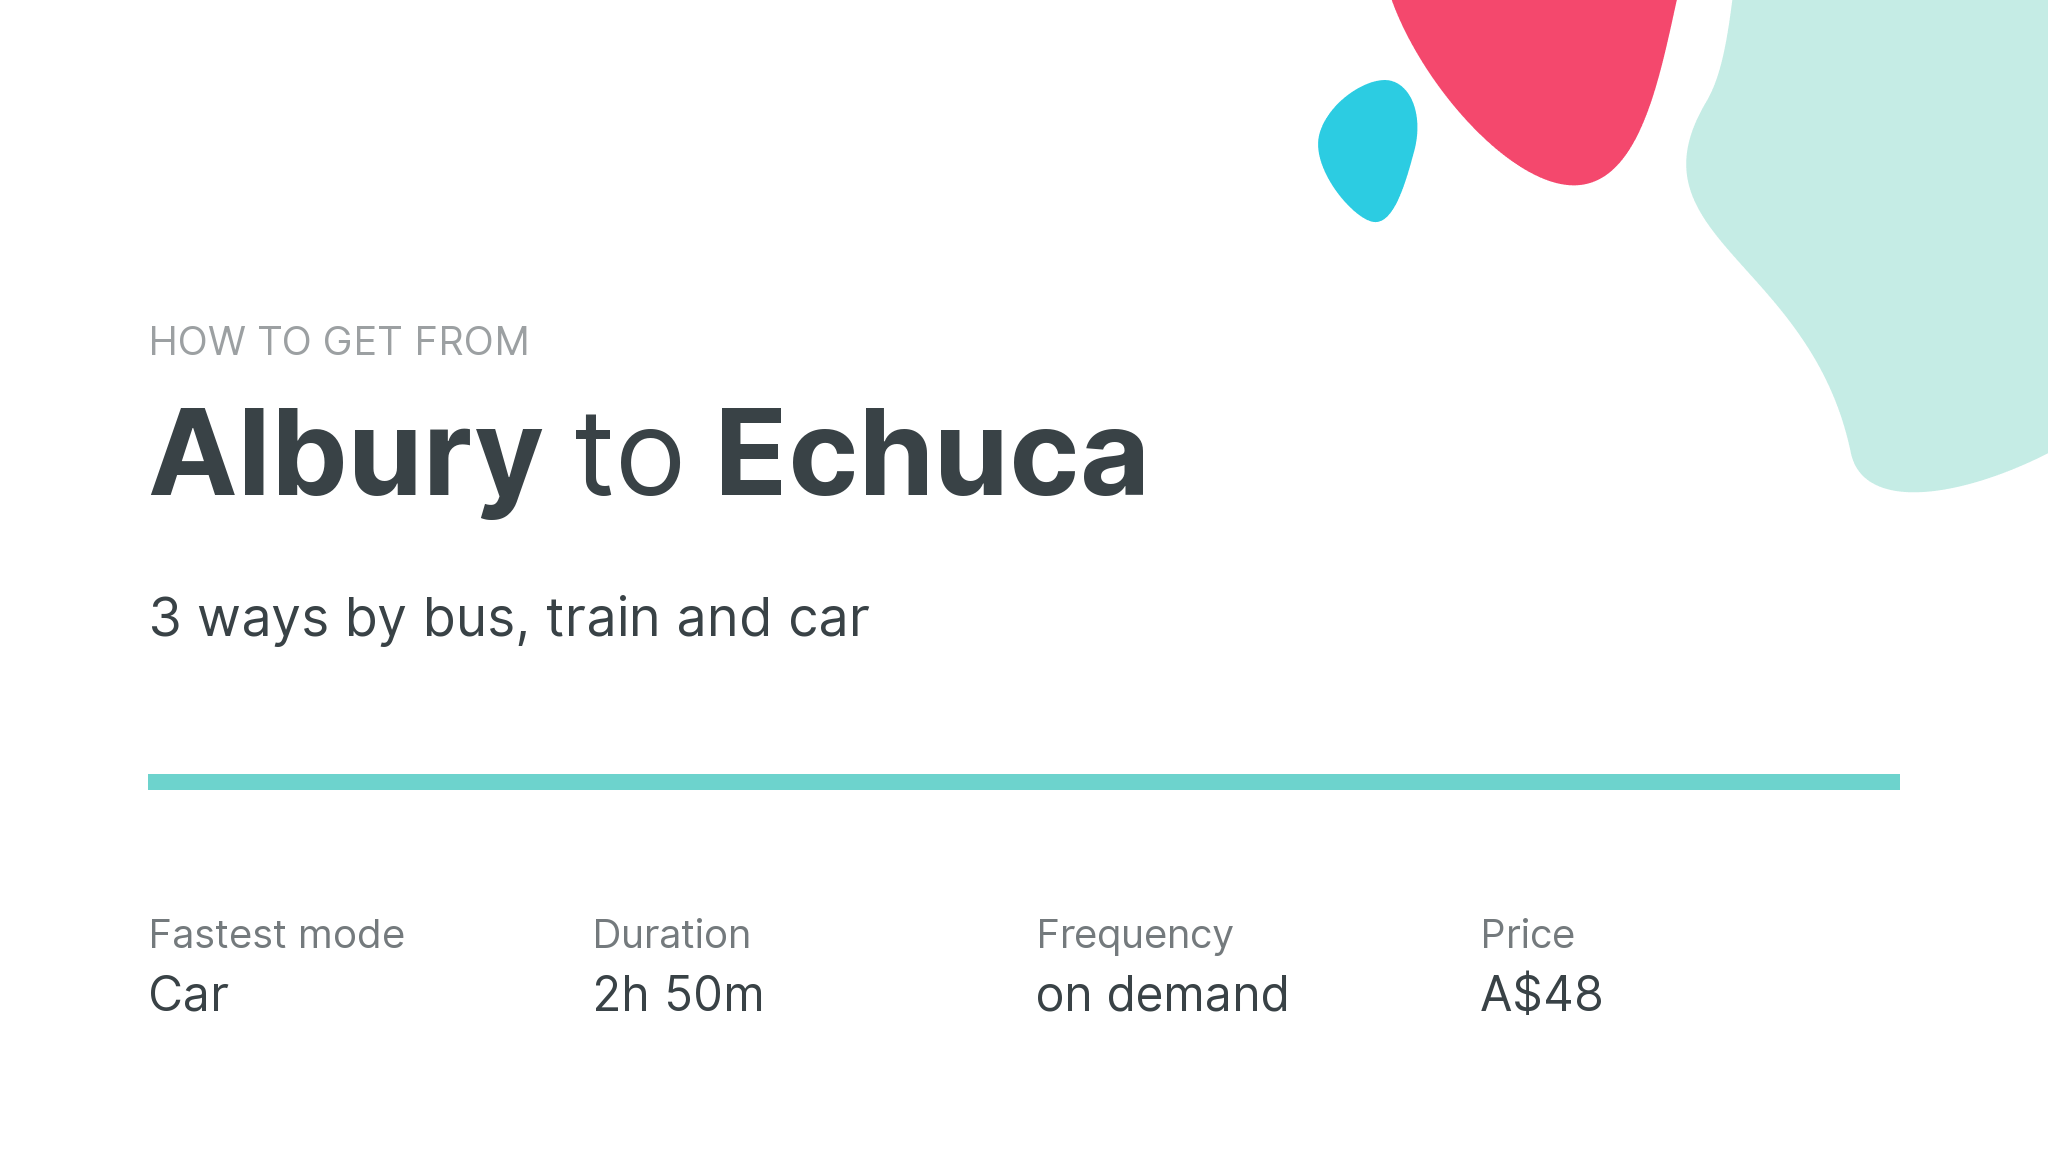 How do I get from Albury to Echuca